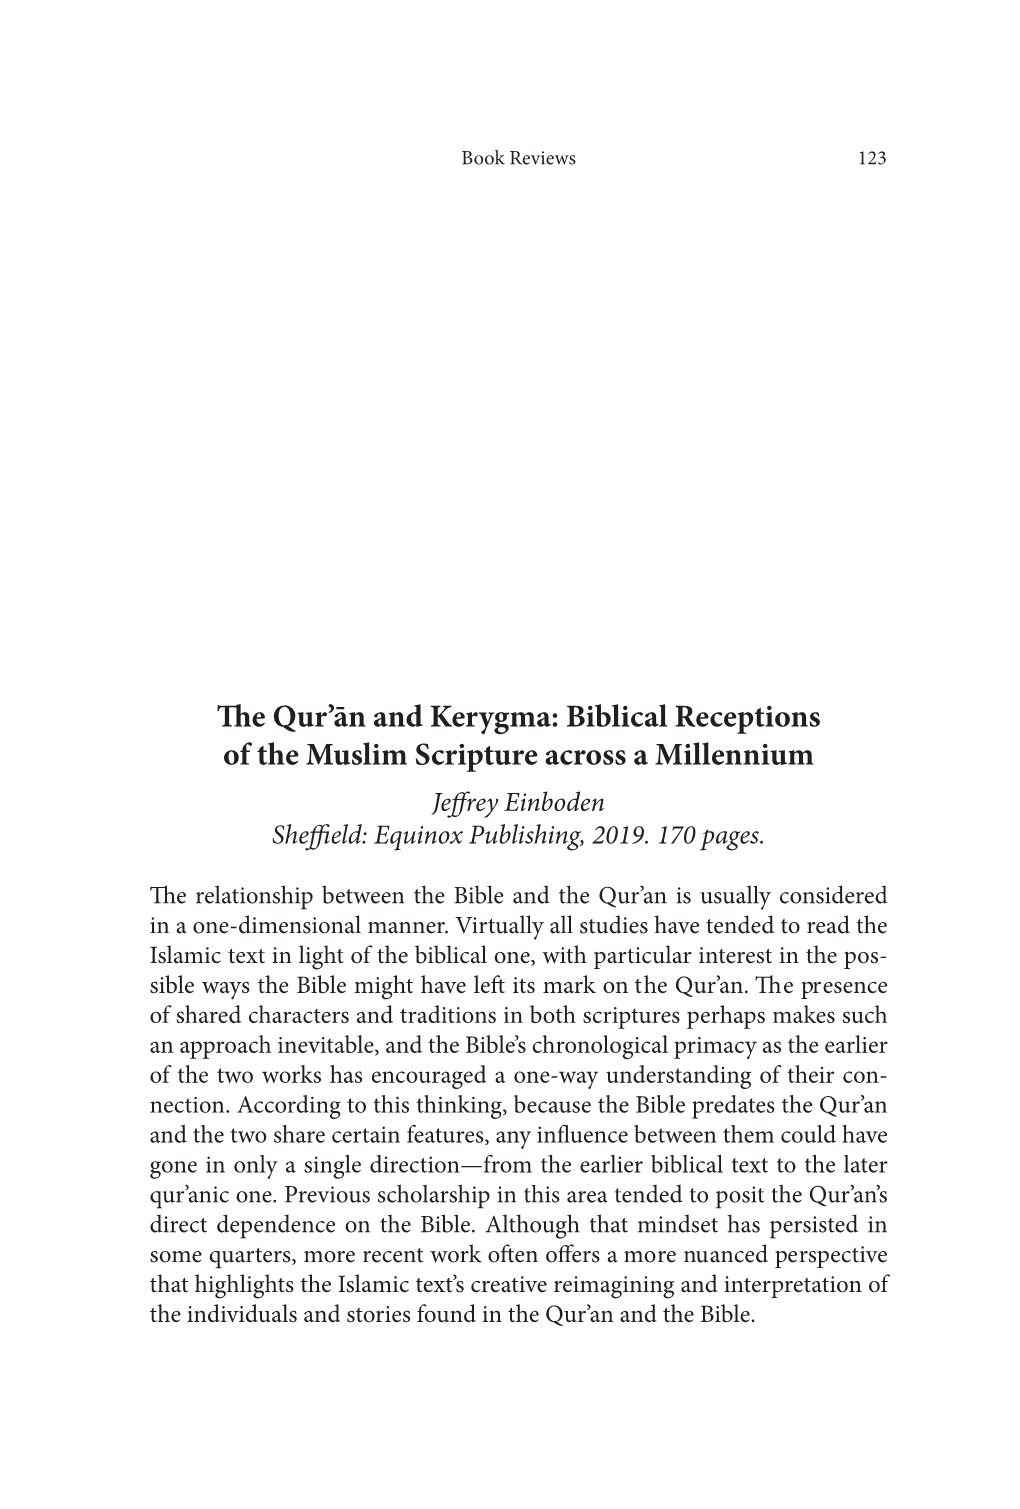 The Qur'ān and Kerygma: Biblical Receptions of the Muslim Scripture